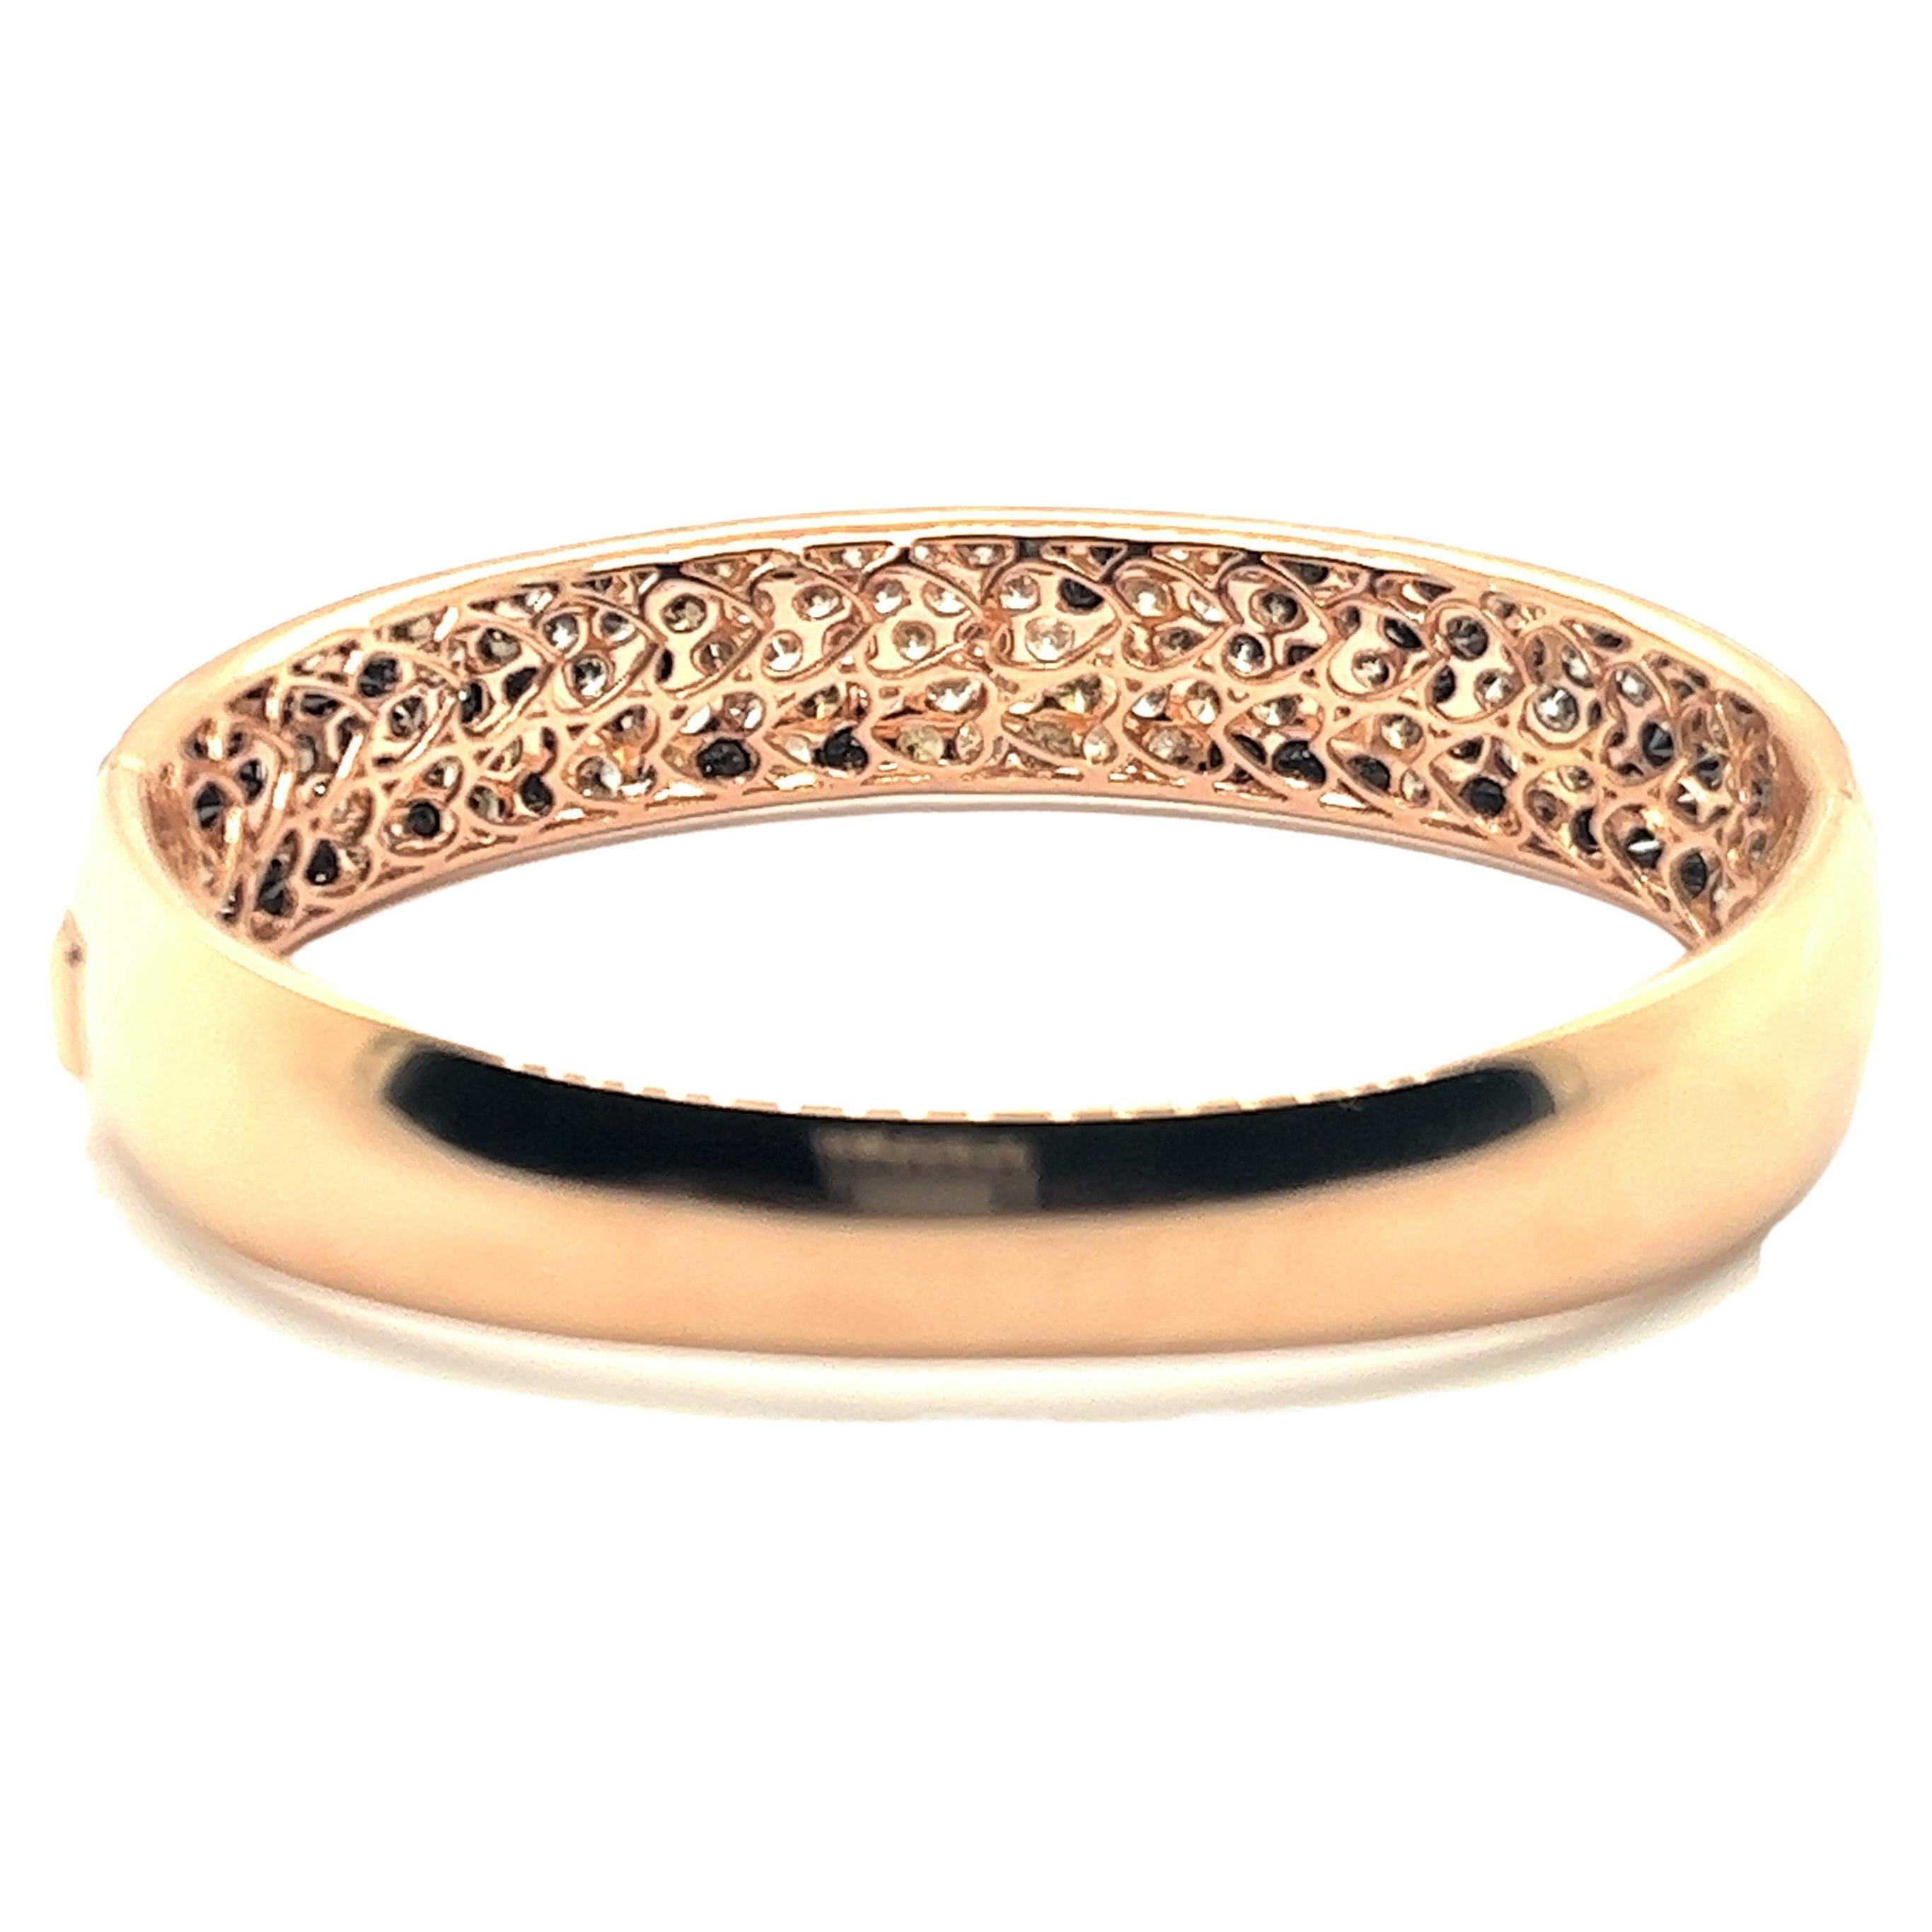 Brilliant Cut Bracelet with White, Black and Champange Diamonds in 18 Karat Red Gold For Sale